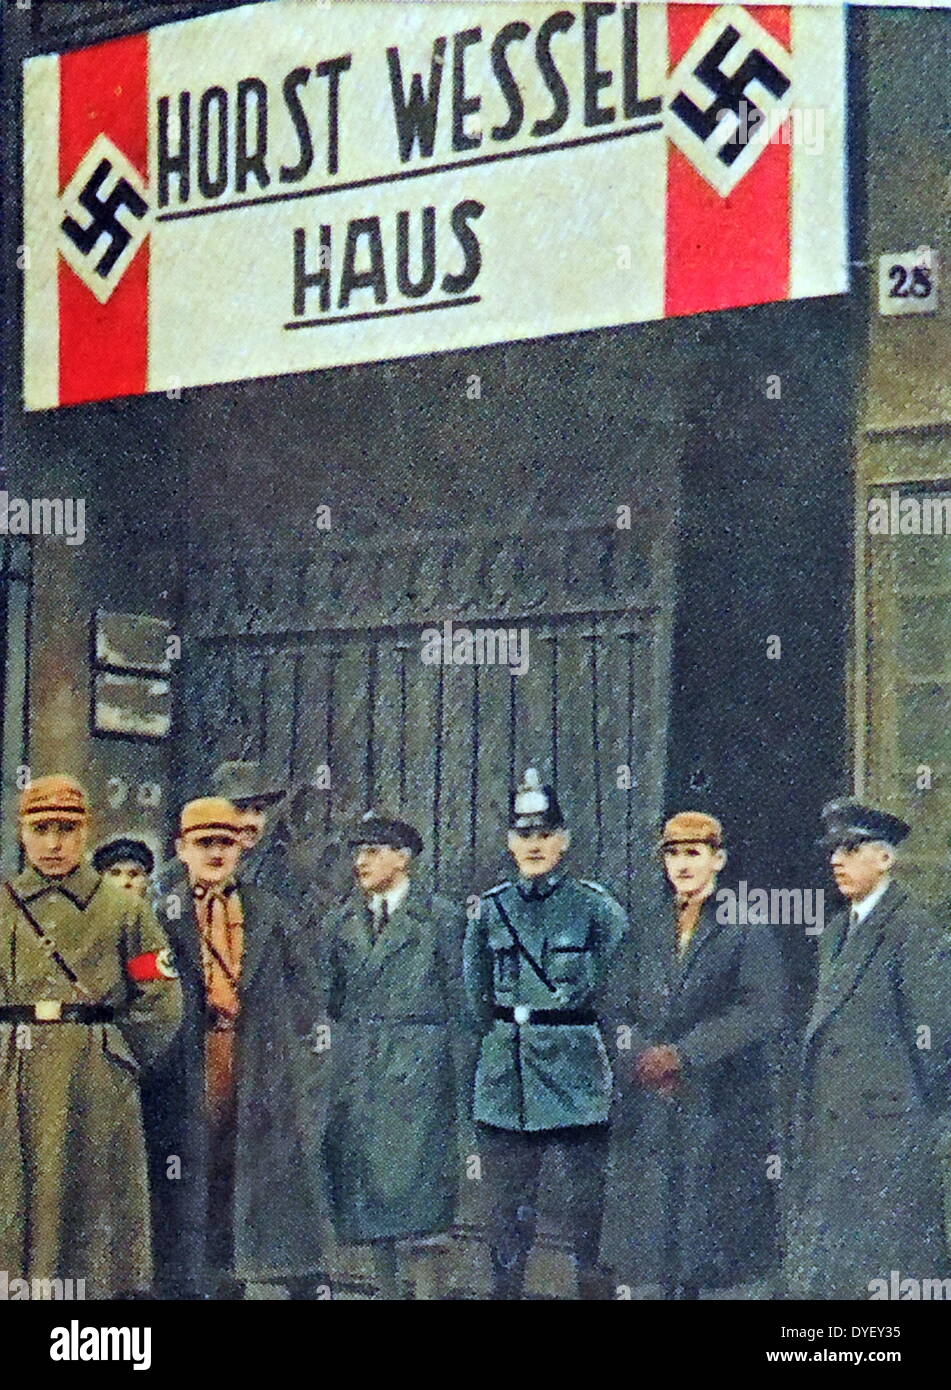 Nazi's gather in front of the Horst Wessel House. Horst Ludwig Wessel (October 9, 1907 – February 23, 1930) German Nazi Party activist and an SA-Sturmführer who was made a posthumous hero of the Nazi movement following his violent death in 1930. Stock Photo